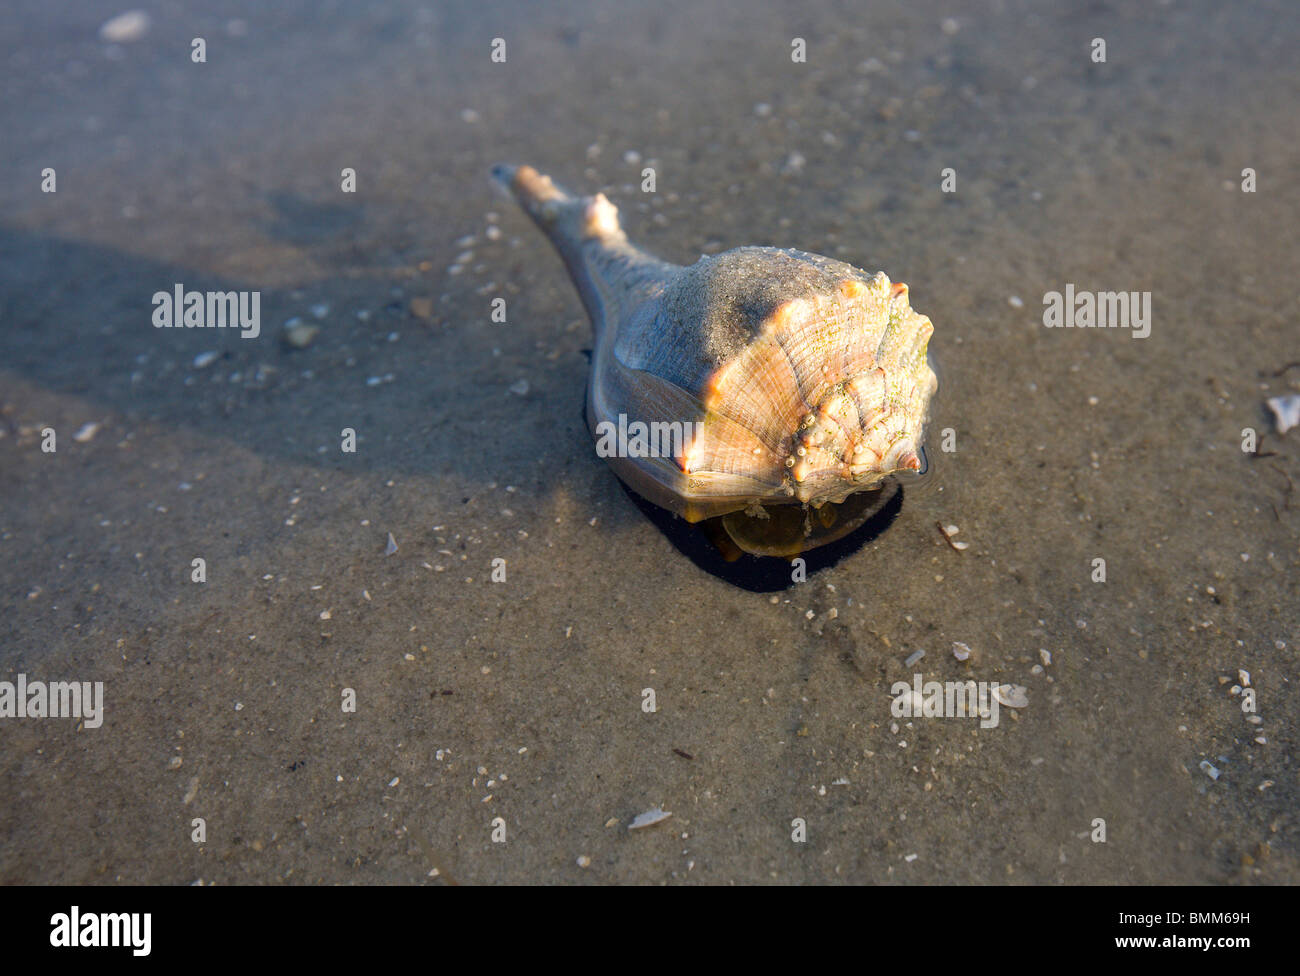 Live Conch Sea Snail moving in shallow water in the Gulf of Mexico Stock Photo